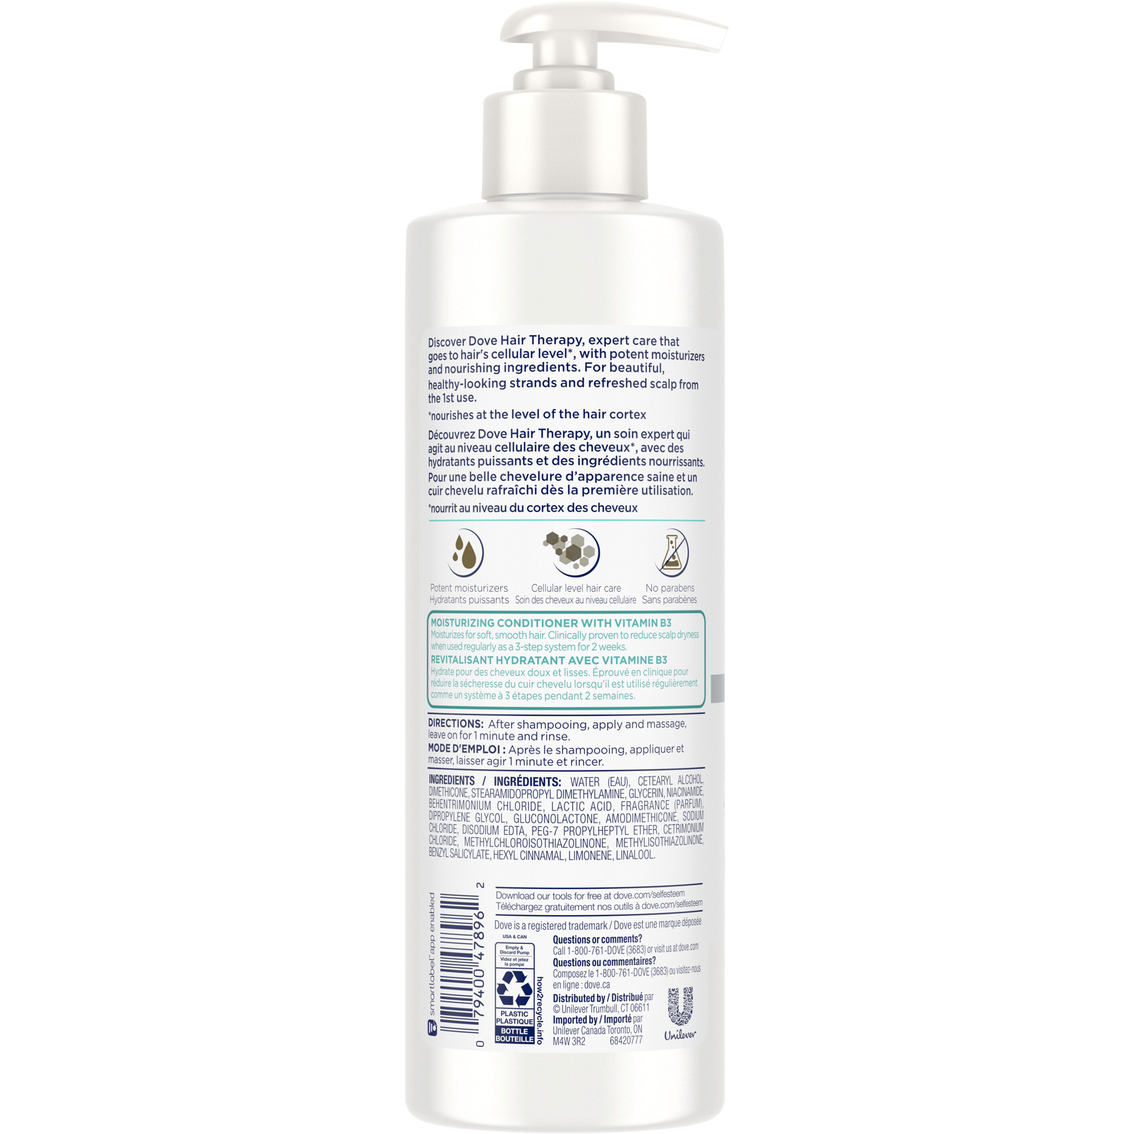 Dove Hair Therapy Conditioner Dry Scalp Therapy, 13.5 oz. - Image 2 of 3